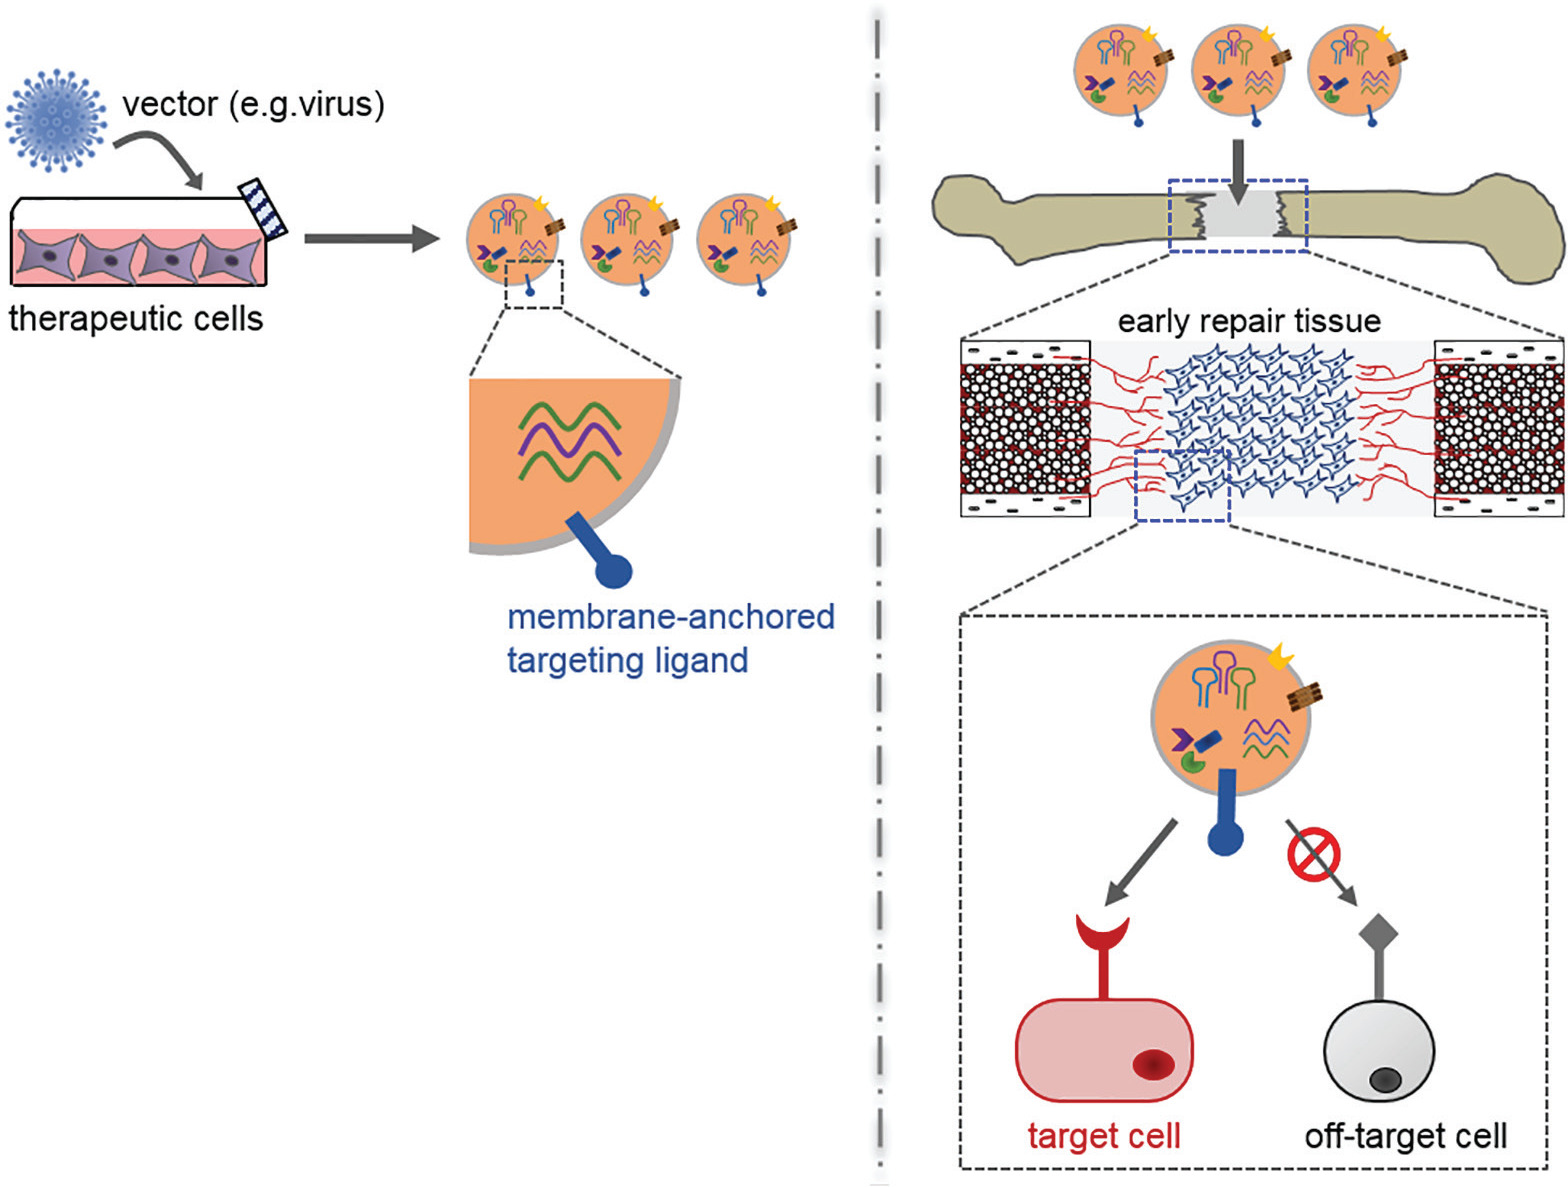 Fig. 5 
          Diagram showing the genetic engineering of extracellular vesicles (EVs) for targeting endogenous repair cells. The efficacy of exogenous EVs may be improved by introducing targeting ligands onto their surface that recognize cell surface receptors specific for key repair cells. One way in which to introduce these ligands would be to genetically engineer parent cells to express them within the extracellular domain of a membrane-anchored fusion protein. The fusion protein would then be expressed on the surface of EVs secreted by the parent cells. In addition to potentially improving the efficiency of target cell uptake of EV contents, this strategy could also limit nonspecific or adverse effects in off-target cells.
        